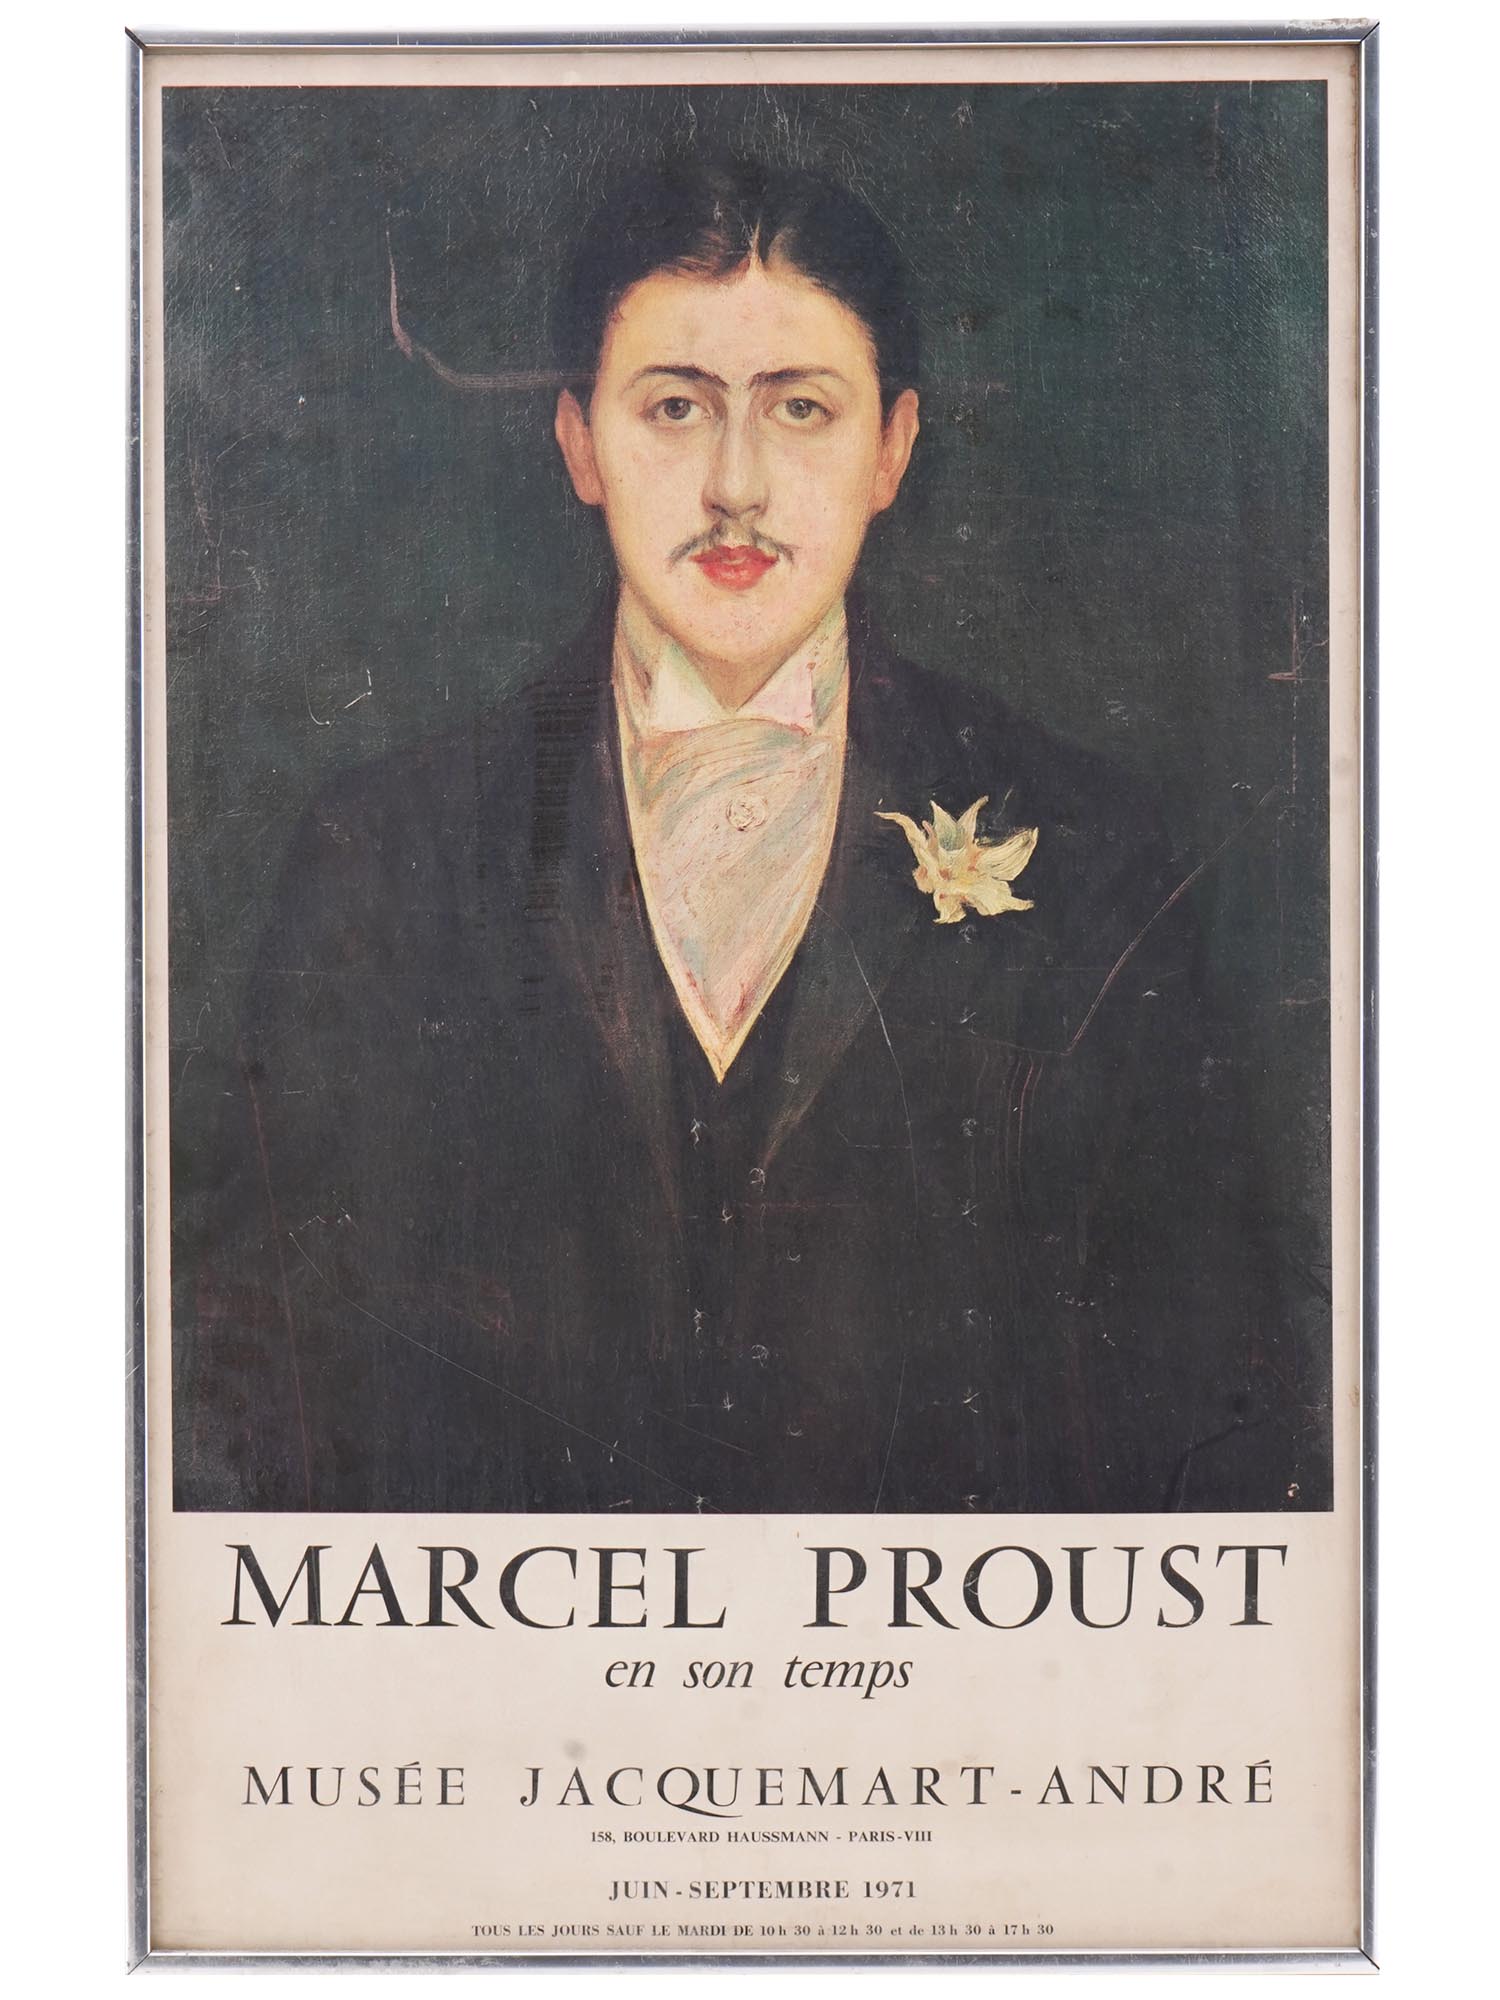 FRENCH PORTRAIT OF MARCEL PROUST EXHIBITION POSTER